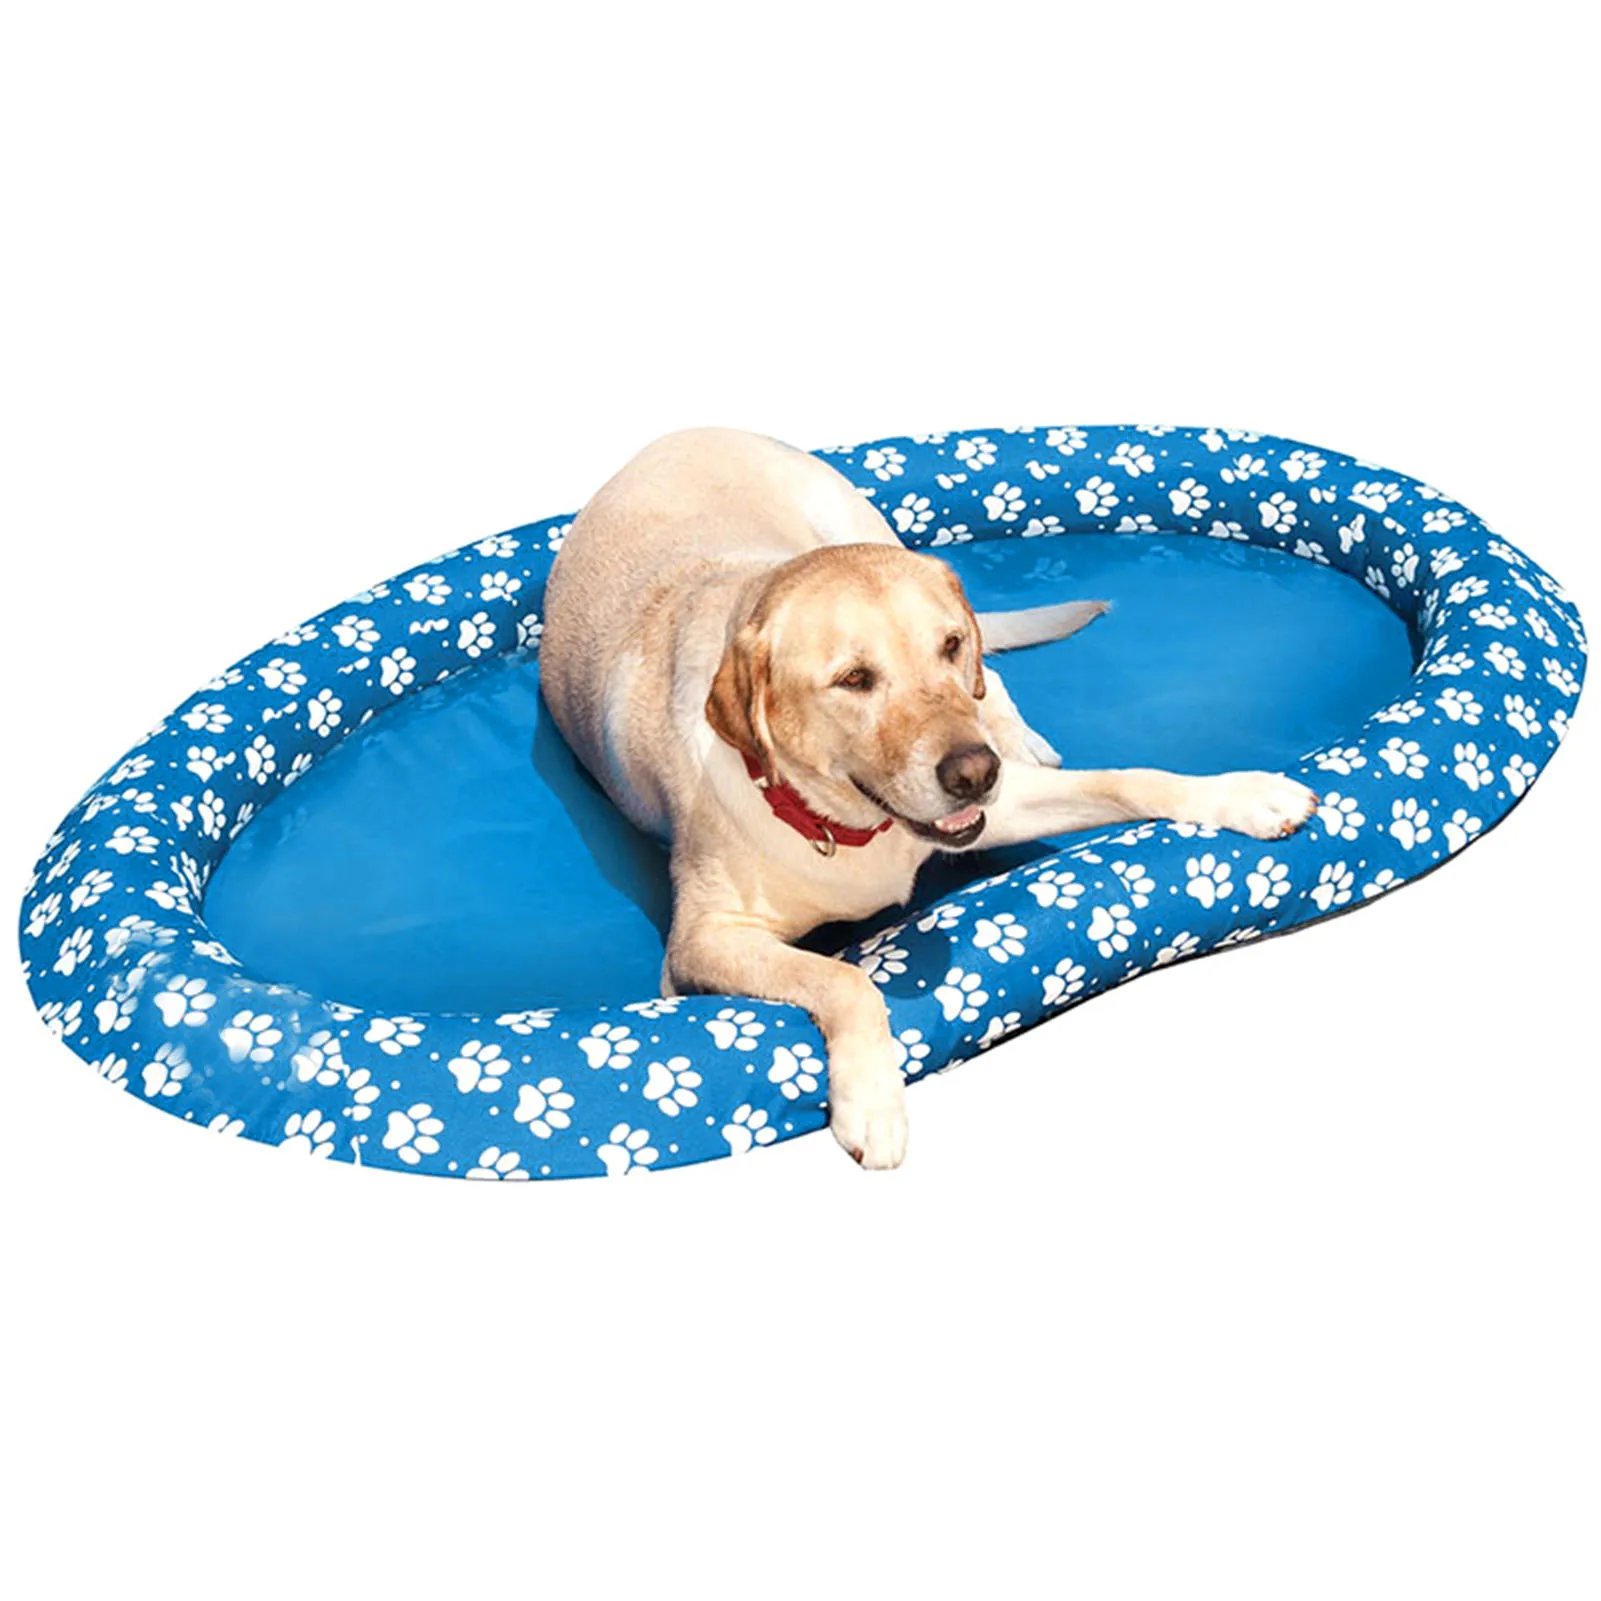 

Cute Paw Print Swimming Pool Float Solid Color Quick to Inflate Pool Float Lounger for Enjoying Summer Leisure Time